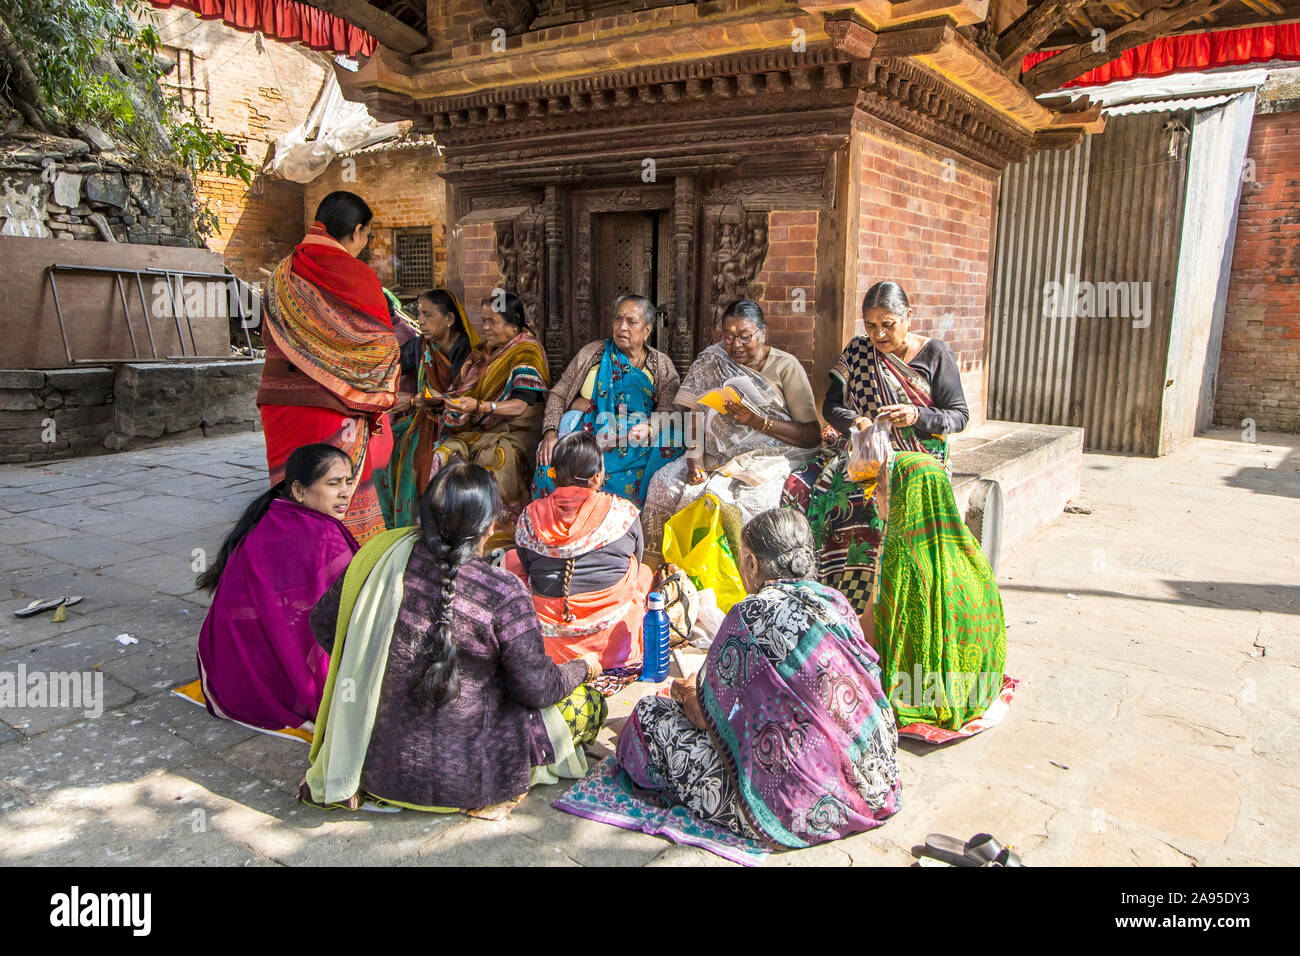 A group of Hindu women devotees in colorful sarees chanting prayers inside the Kathmandu Durbar Square in front of the main temple Stock Photo